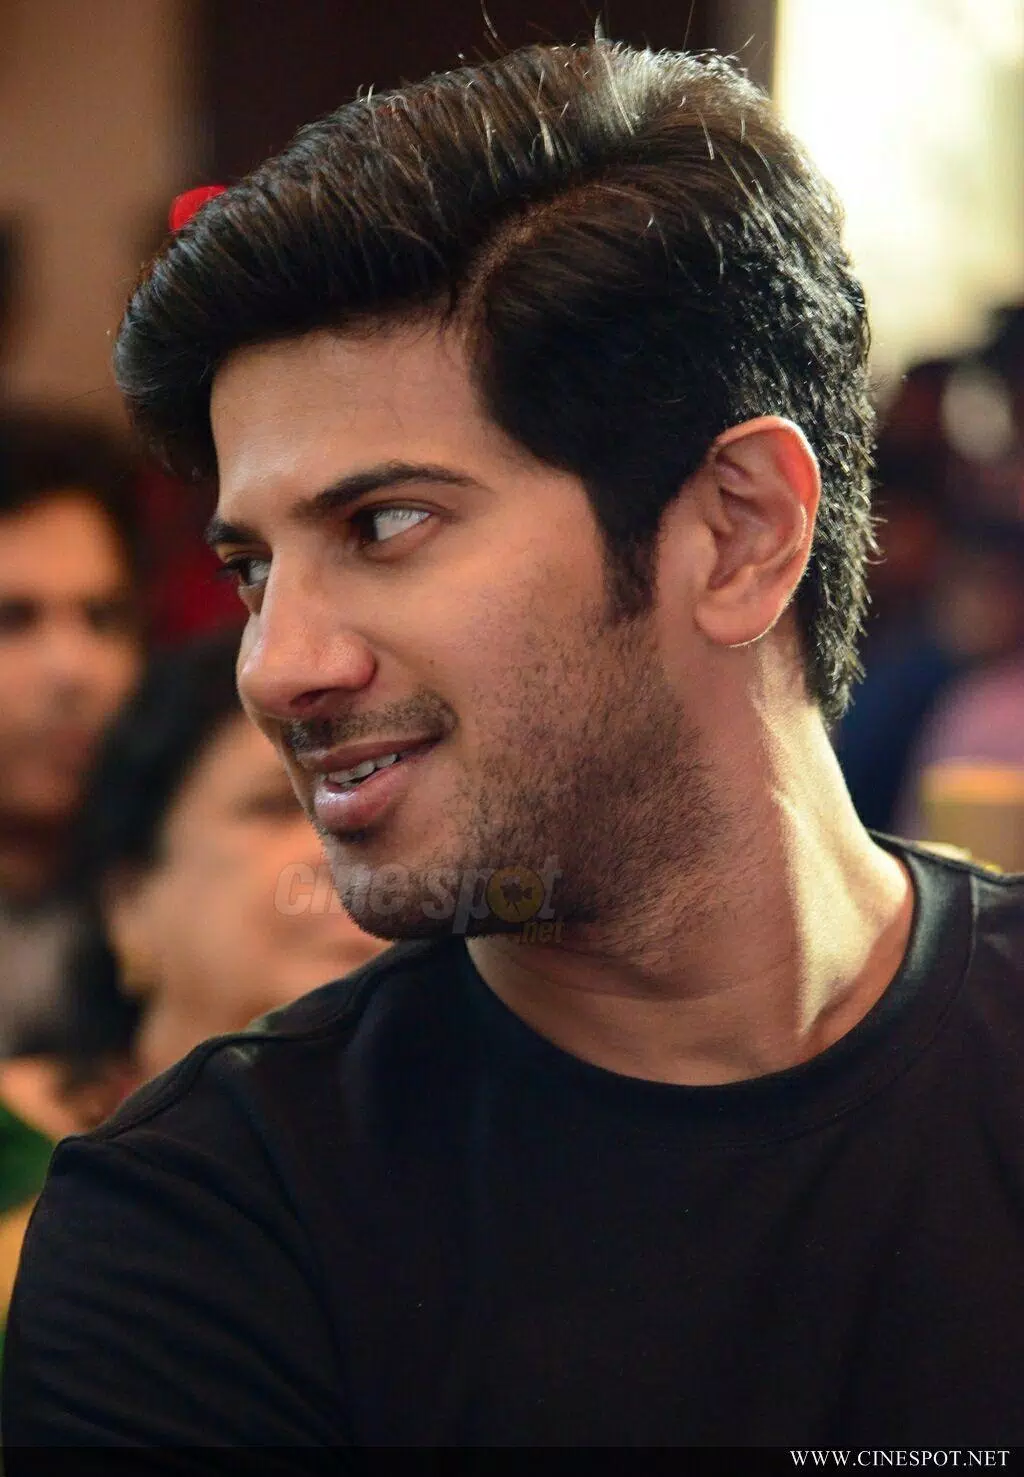 Dulquer Salmaan Wallpapers HD APK for Android Download